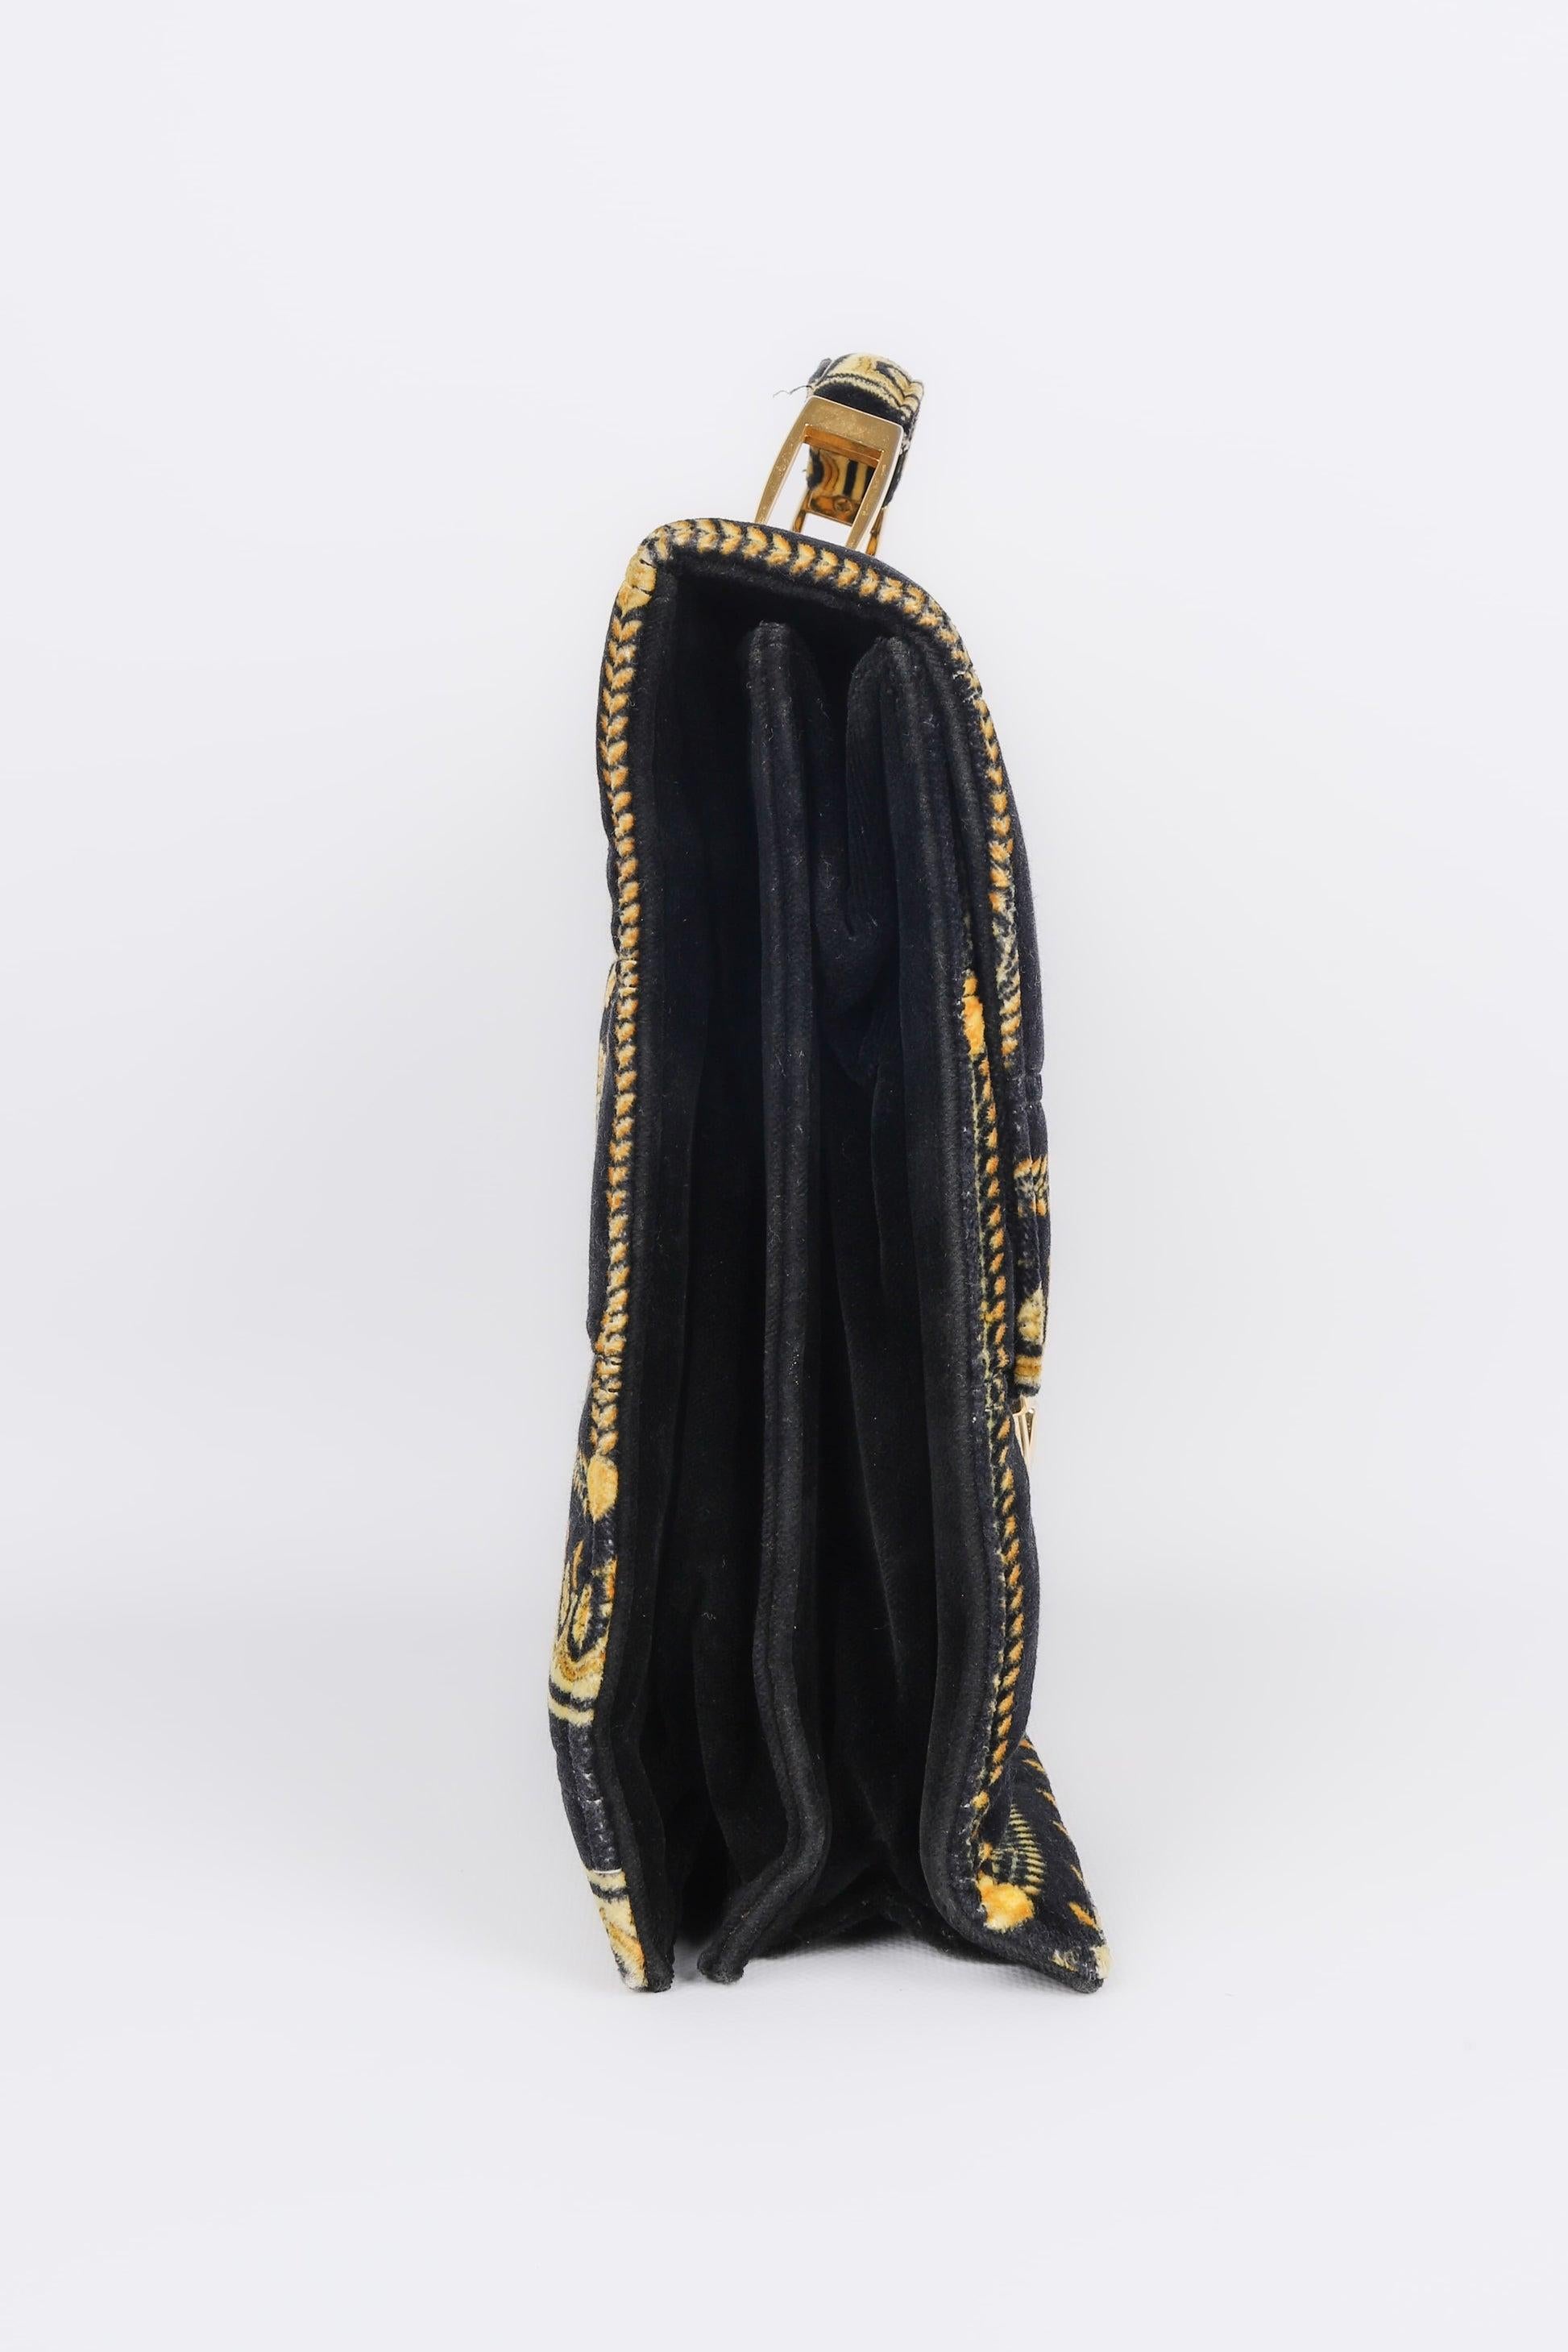 Versace - (Made in Italy) Black velvet bag with golden patterns and golden metal elements.

Additional information:
Condition: Good condition
Dimensions: Length: 33 cm - Height: 27 cm - Depth: 12 cm - Handle: 21 cm

Seller Reference: S189